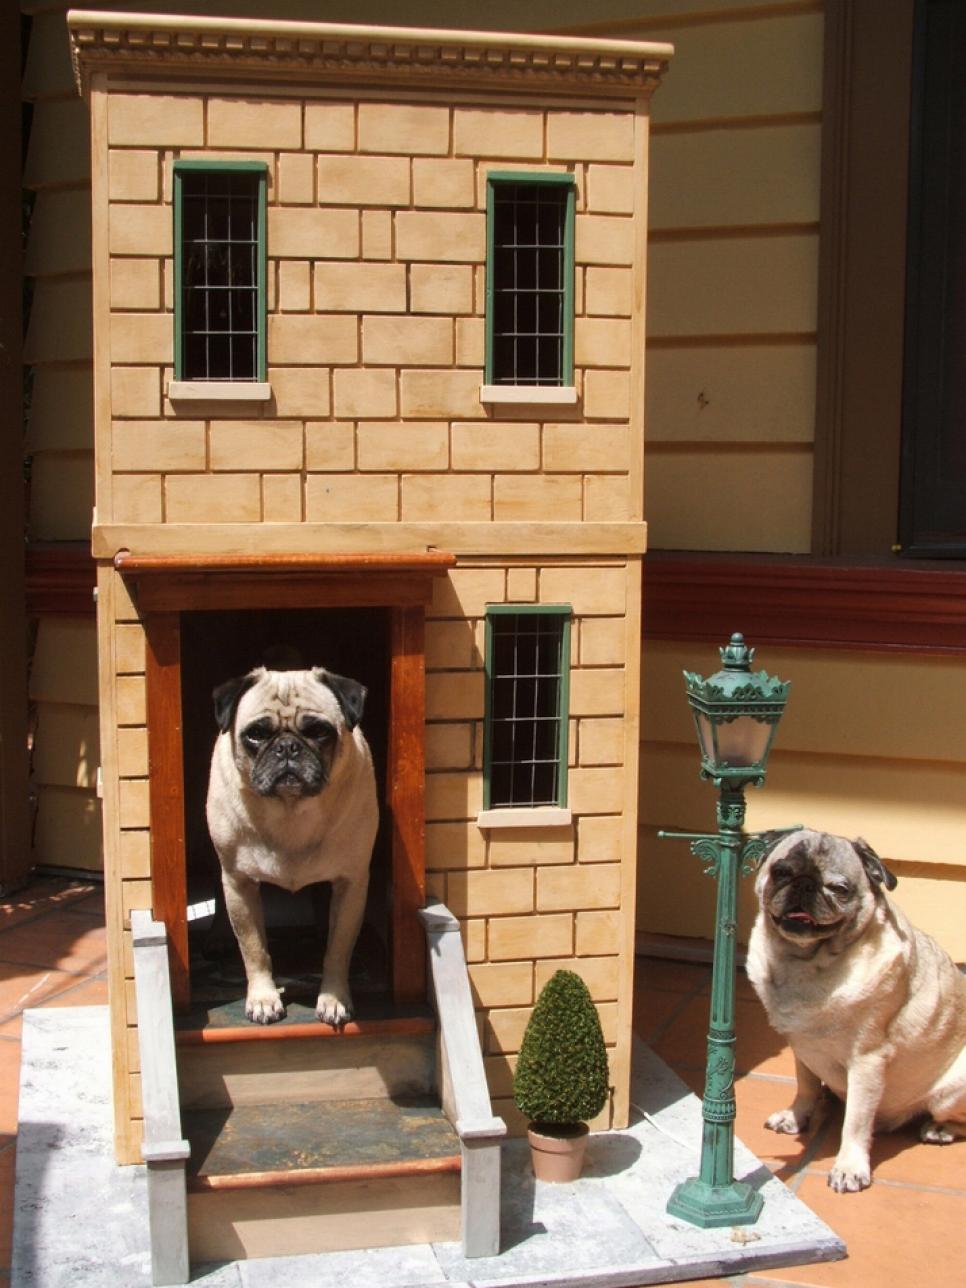 Two story dog house for pugs